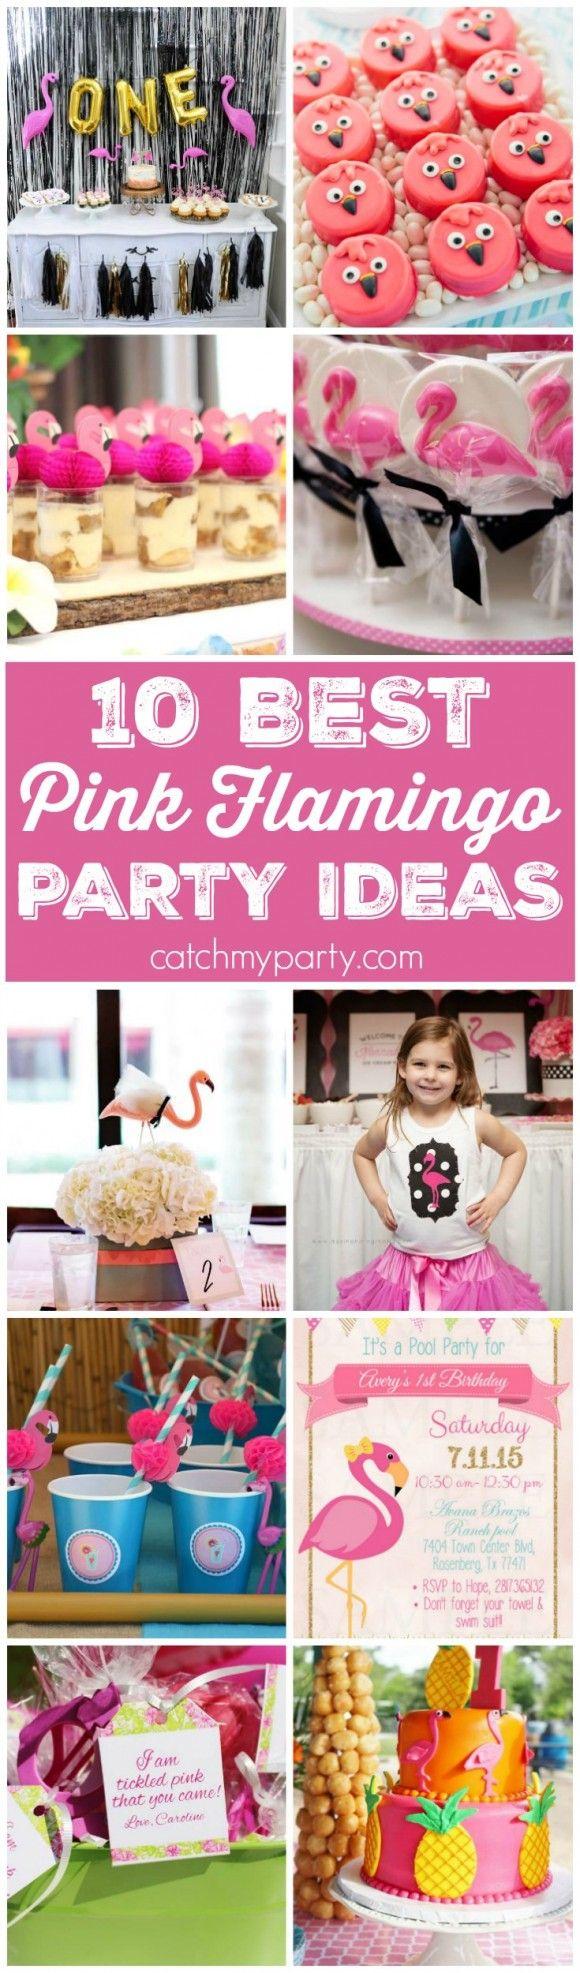 Mariage - 10 Best Pink Flamingo Party Ideas